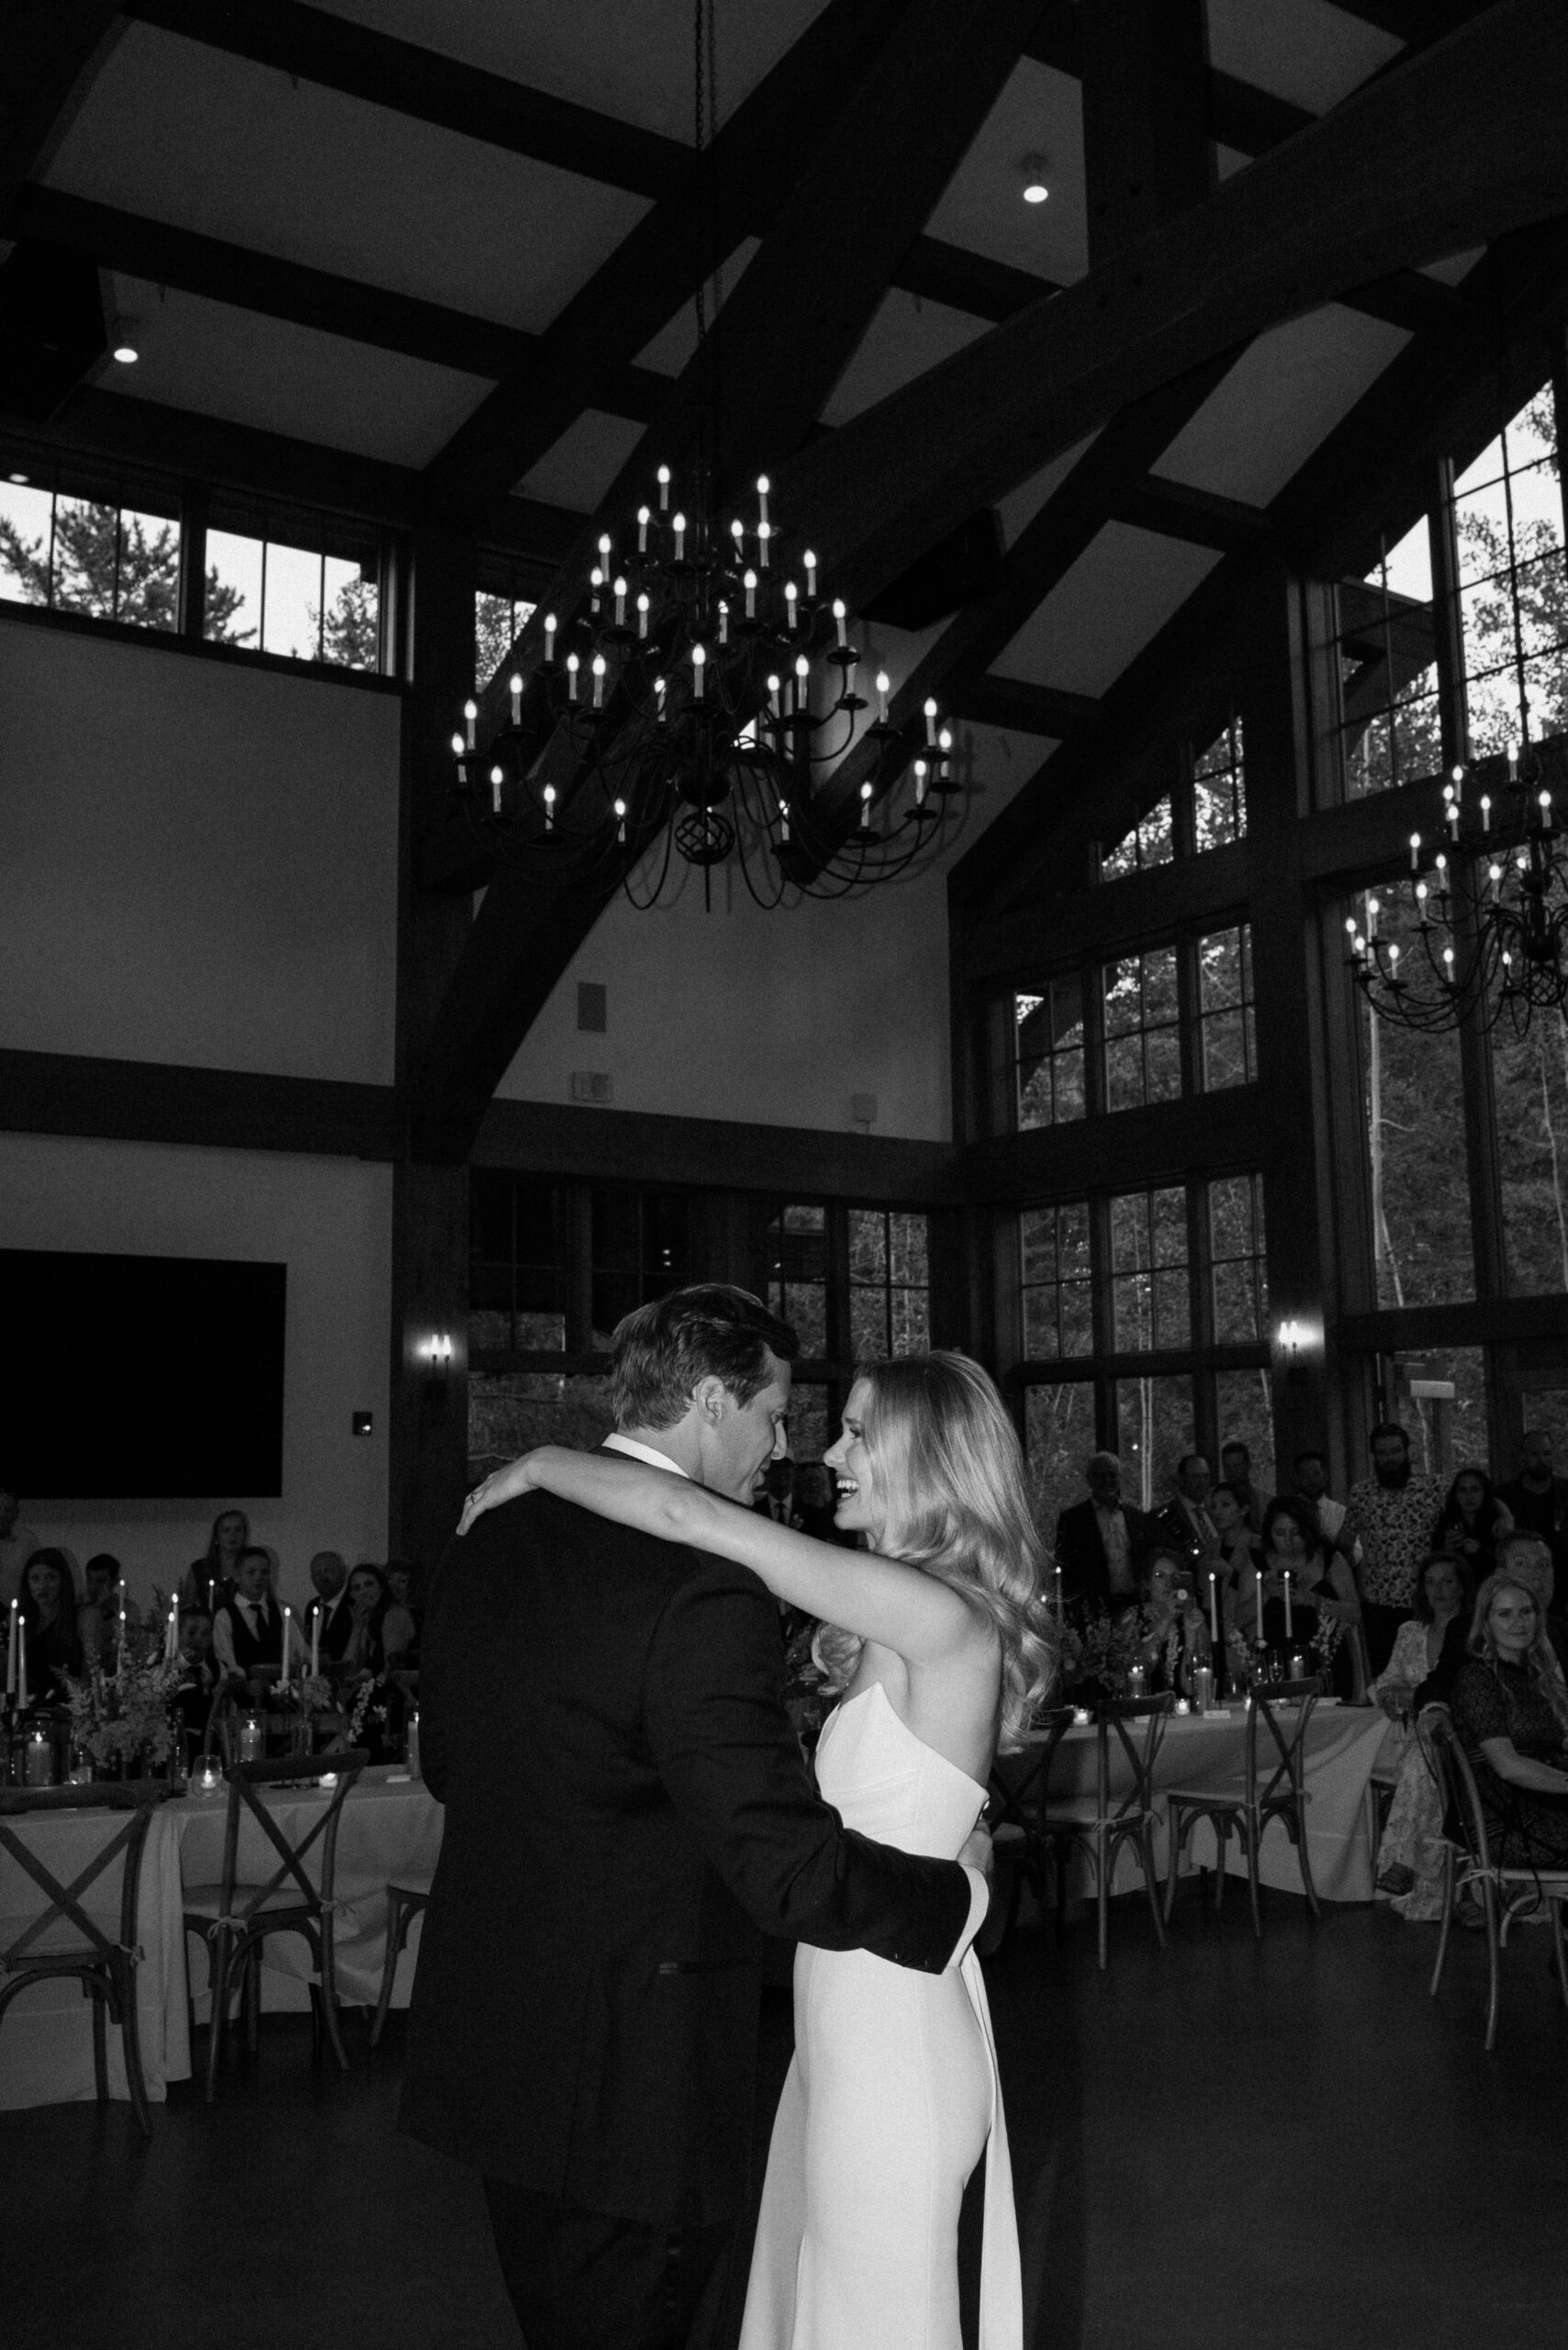 A bride and groom dance to their first dance at their wedding in Vail, Colorado. Photo by Colorado wedding photographer Ashley Joyce.